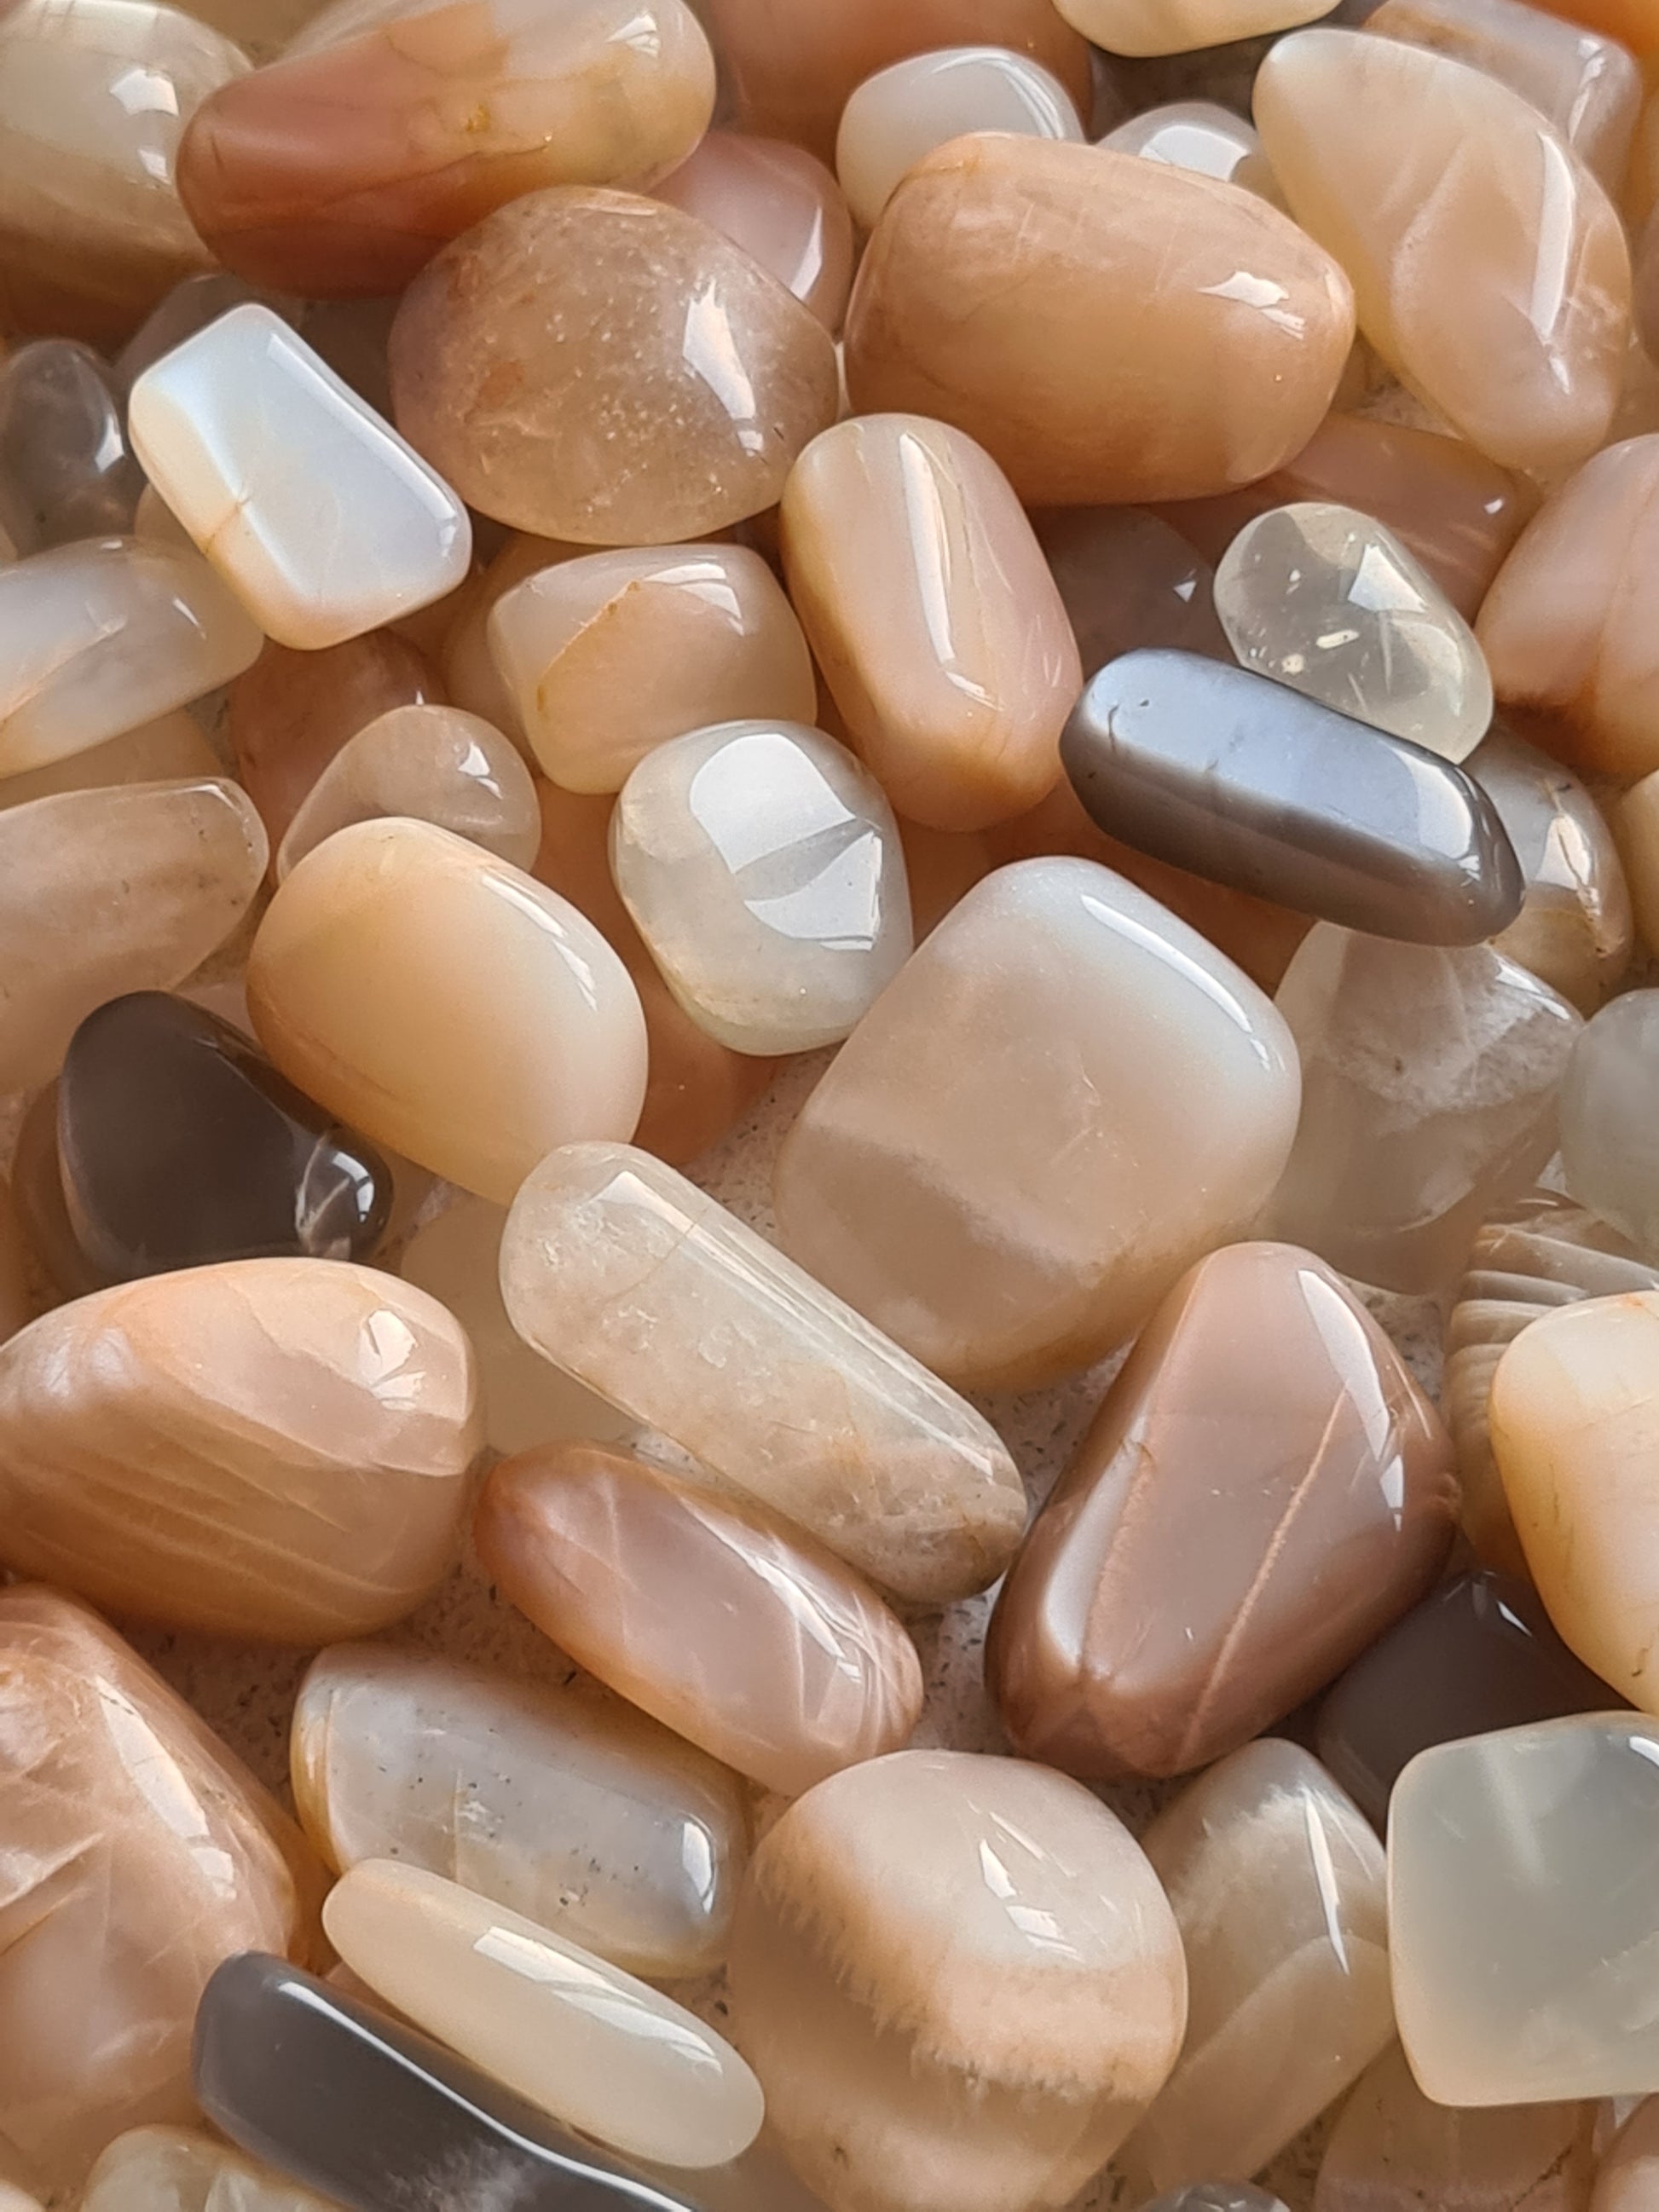 Peach, Grey and White Moonstone Tumbles, from 5g to 20g sizes available.